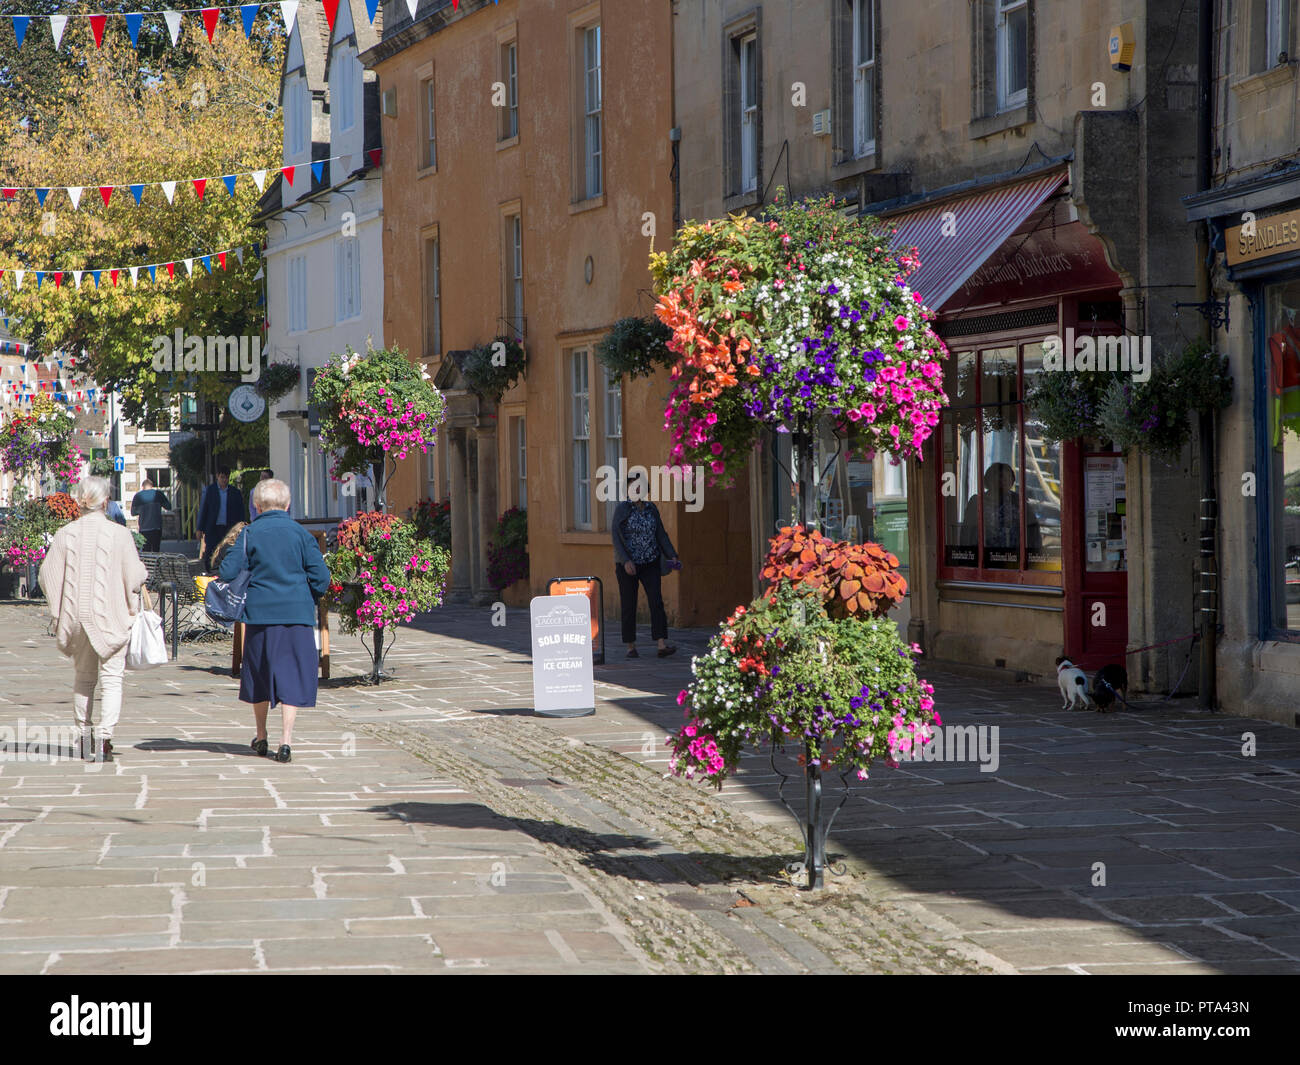 Historic street and buildings in town centre of Corsham, Wiltshire, England, UK Stock Photo